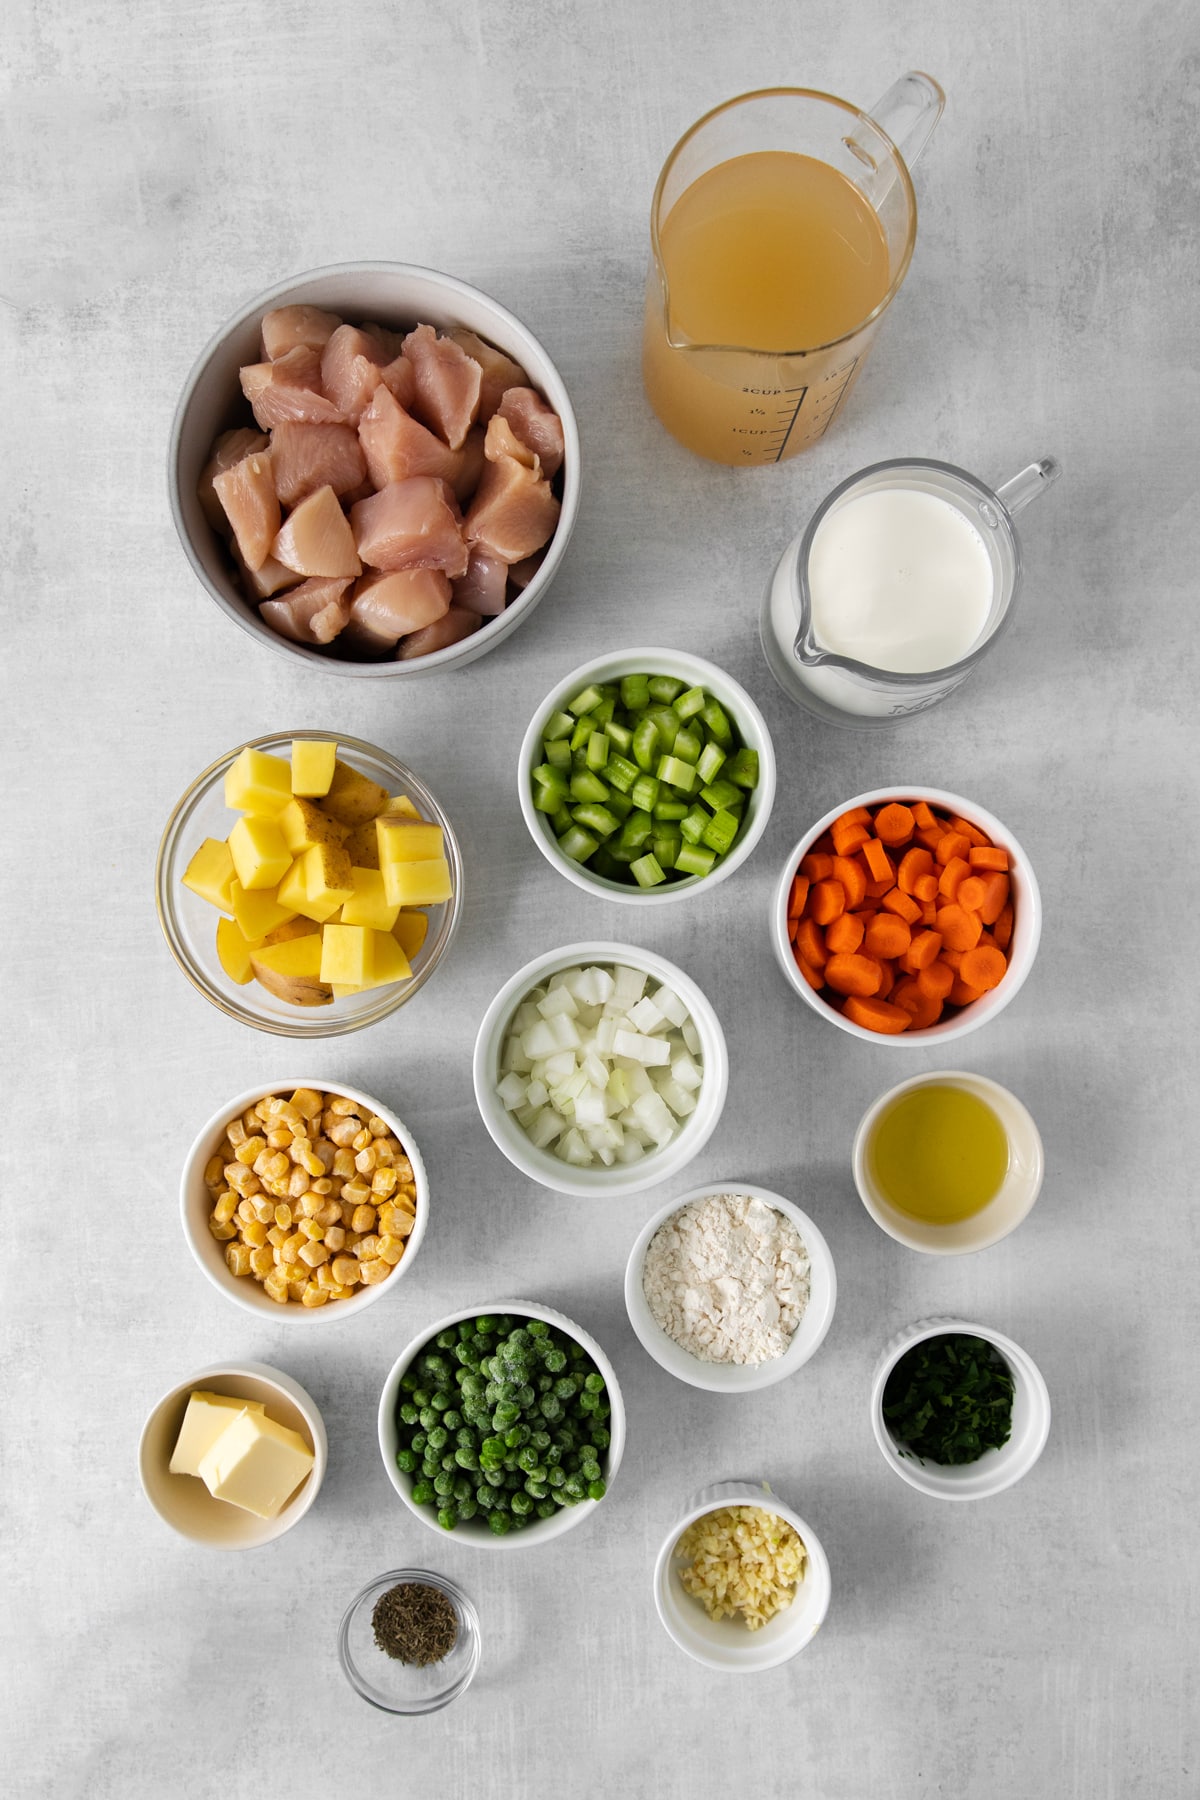 Ingredients for chicken pot pie soup includes olive oil, chicken breast, butter, carrots, celery, onion, garlic, thyme, all purpose flour, potatoes, peas, corn and parsley.